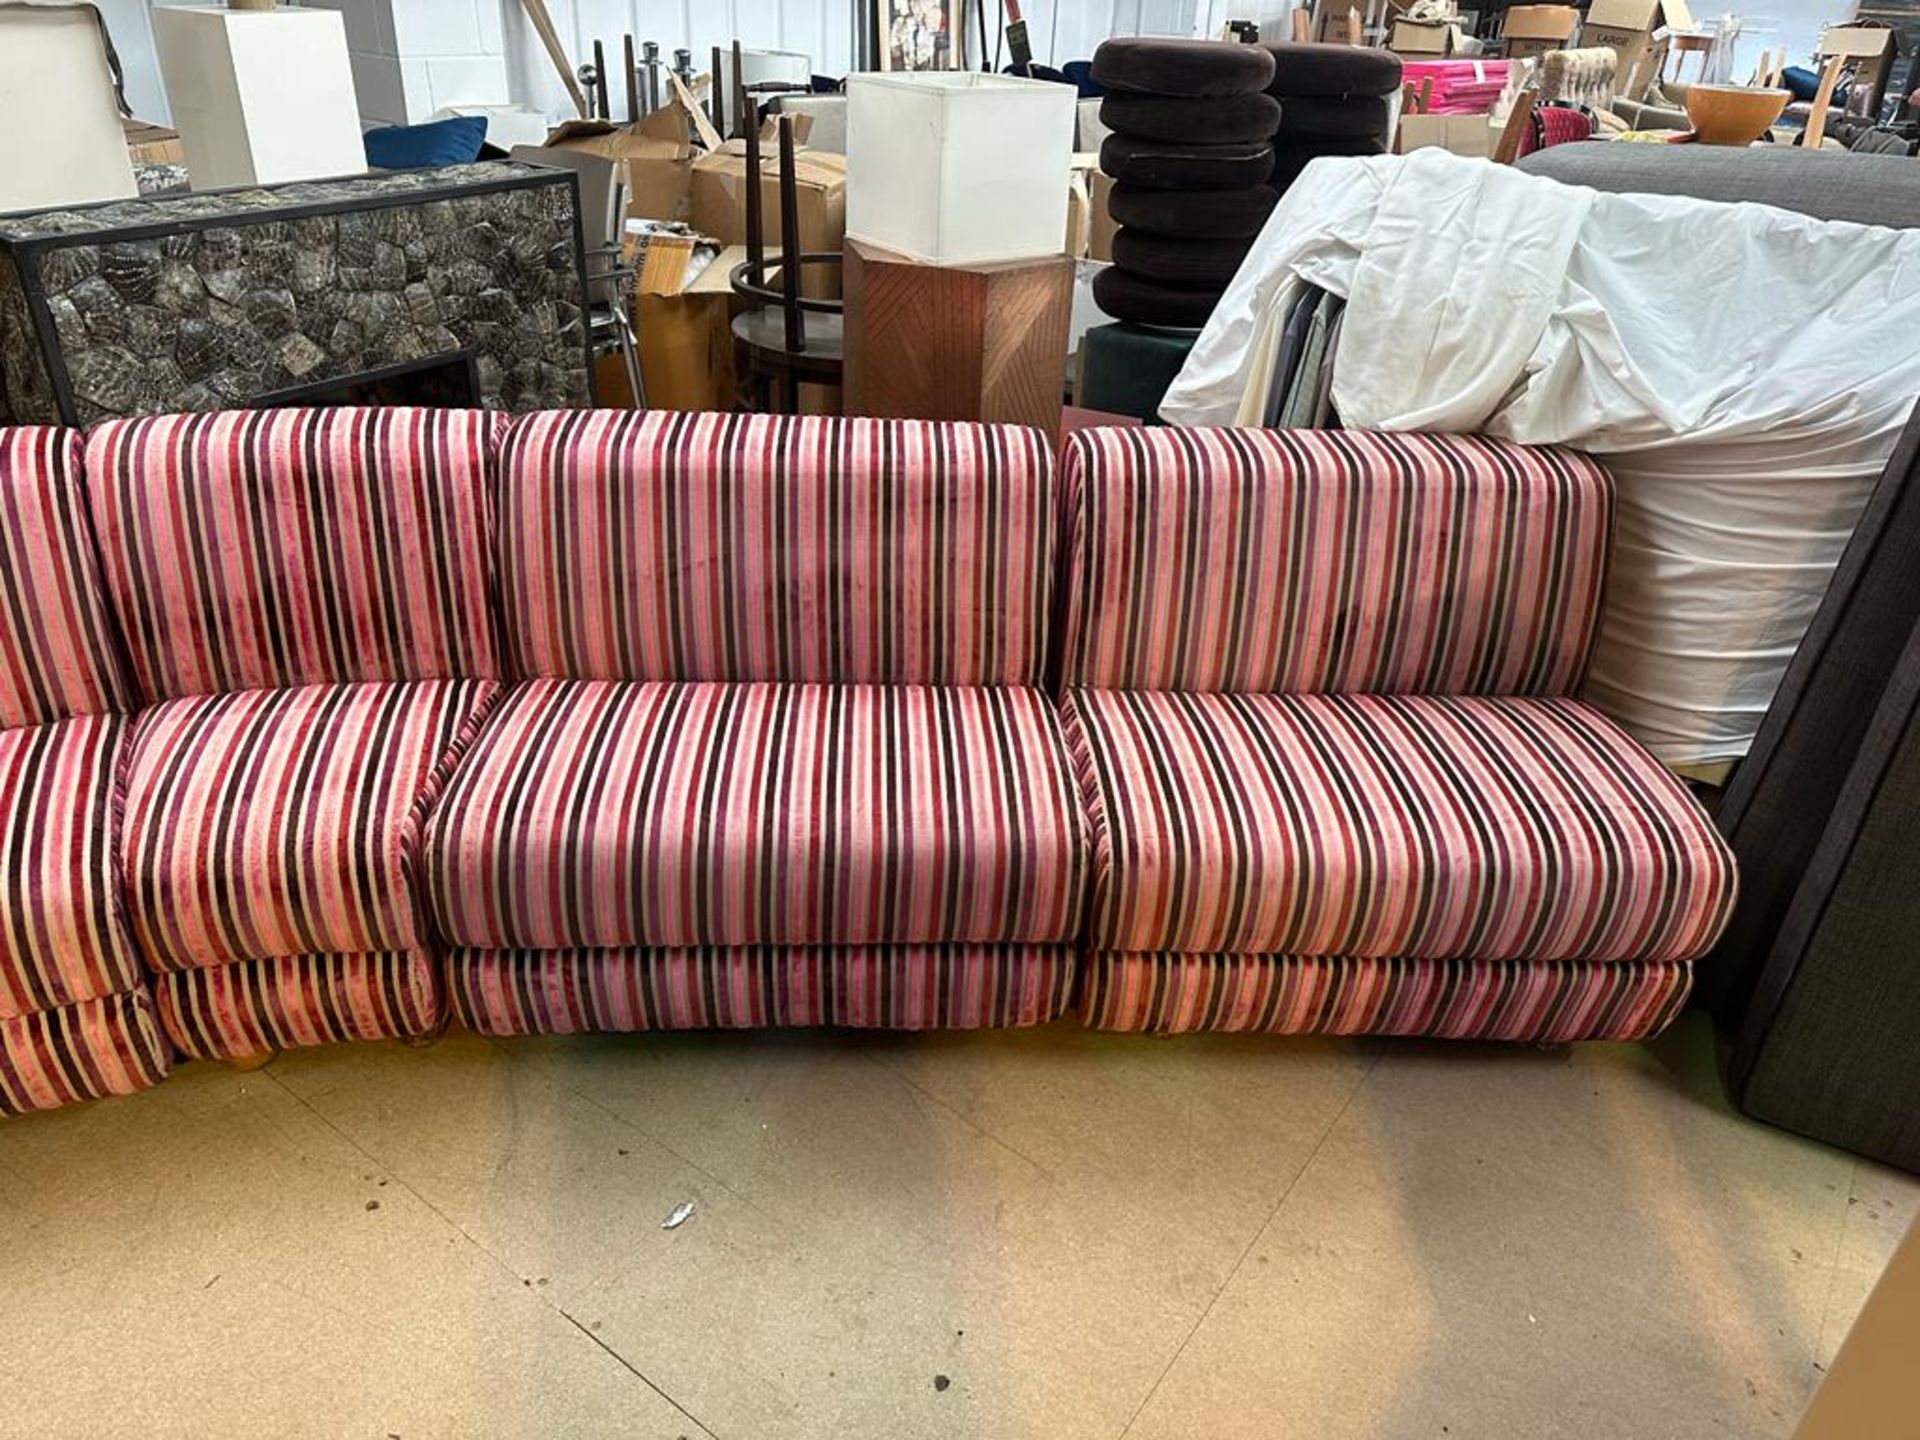 Sectional sofa comprising six pieces upholstered in a pink stipe material spans approximately 4m - Image 4 of 4